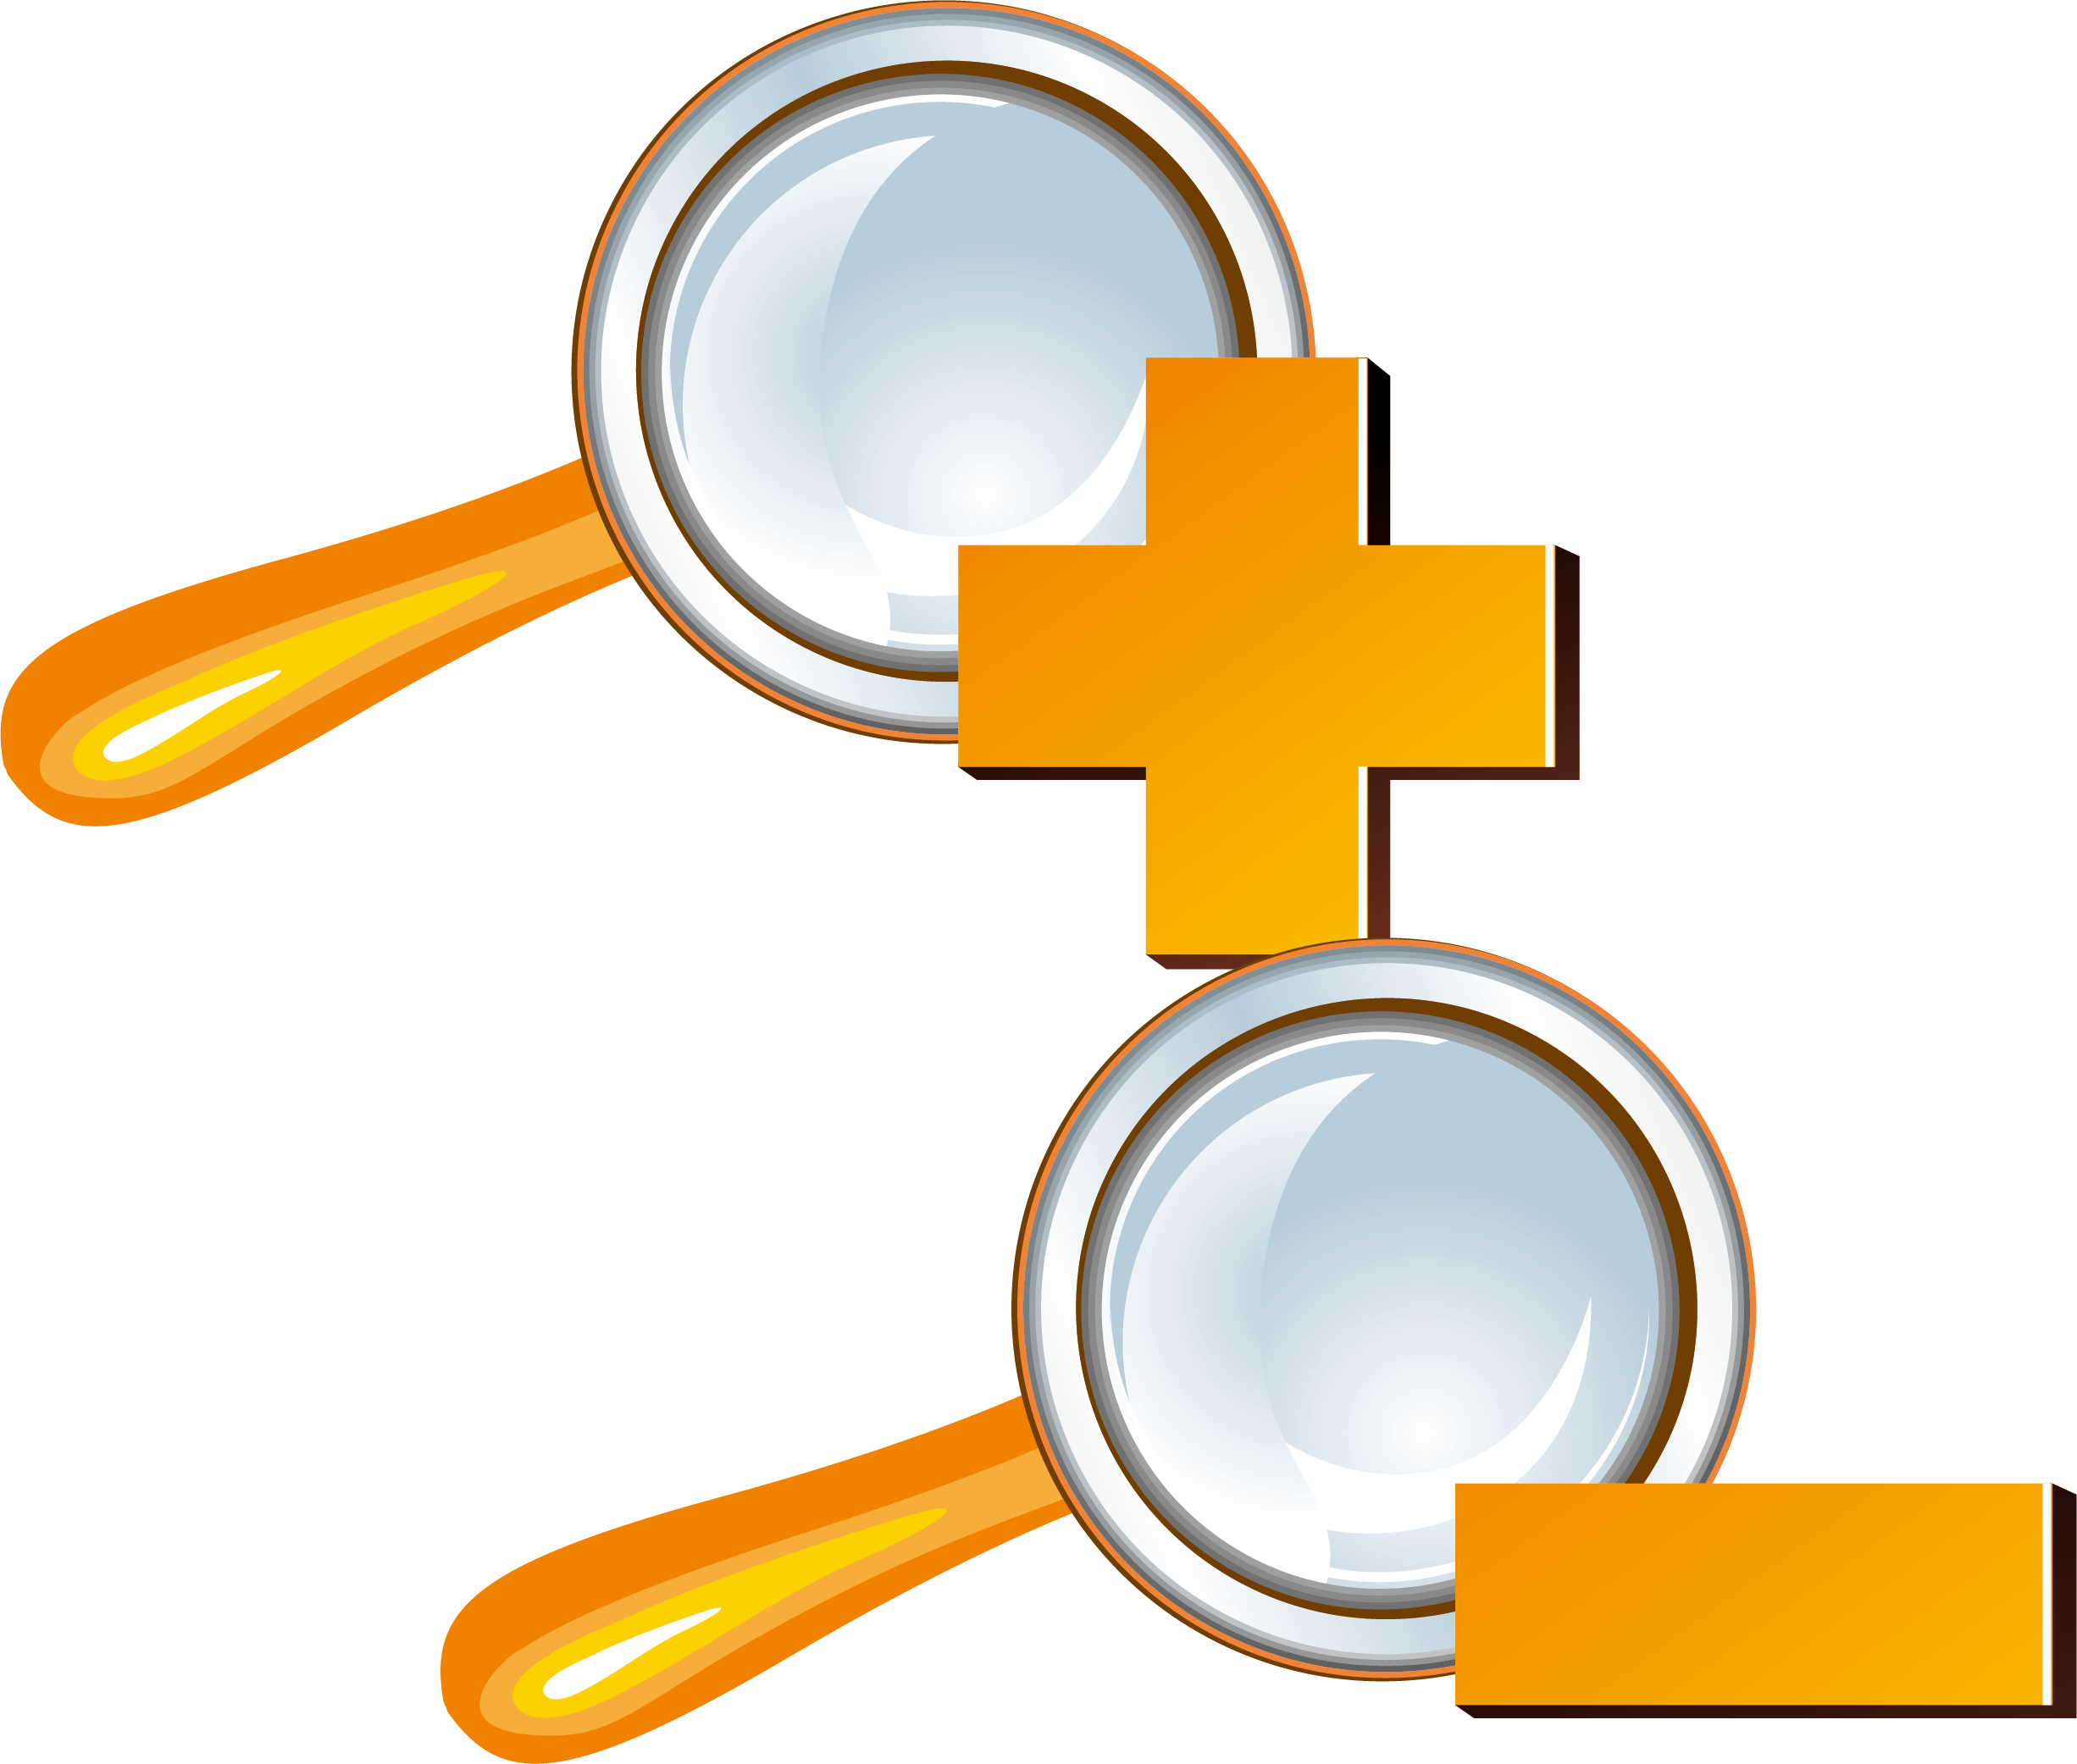 Magnifying Glass Plus And Minus Signs Adobe Illustrator - Portable Network Graphics (2452x2083)